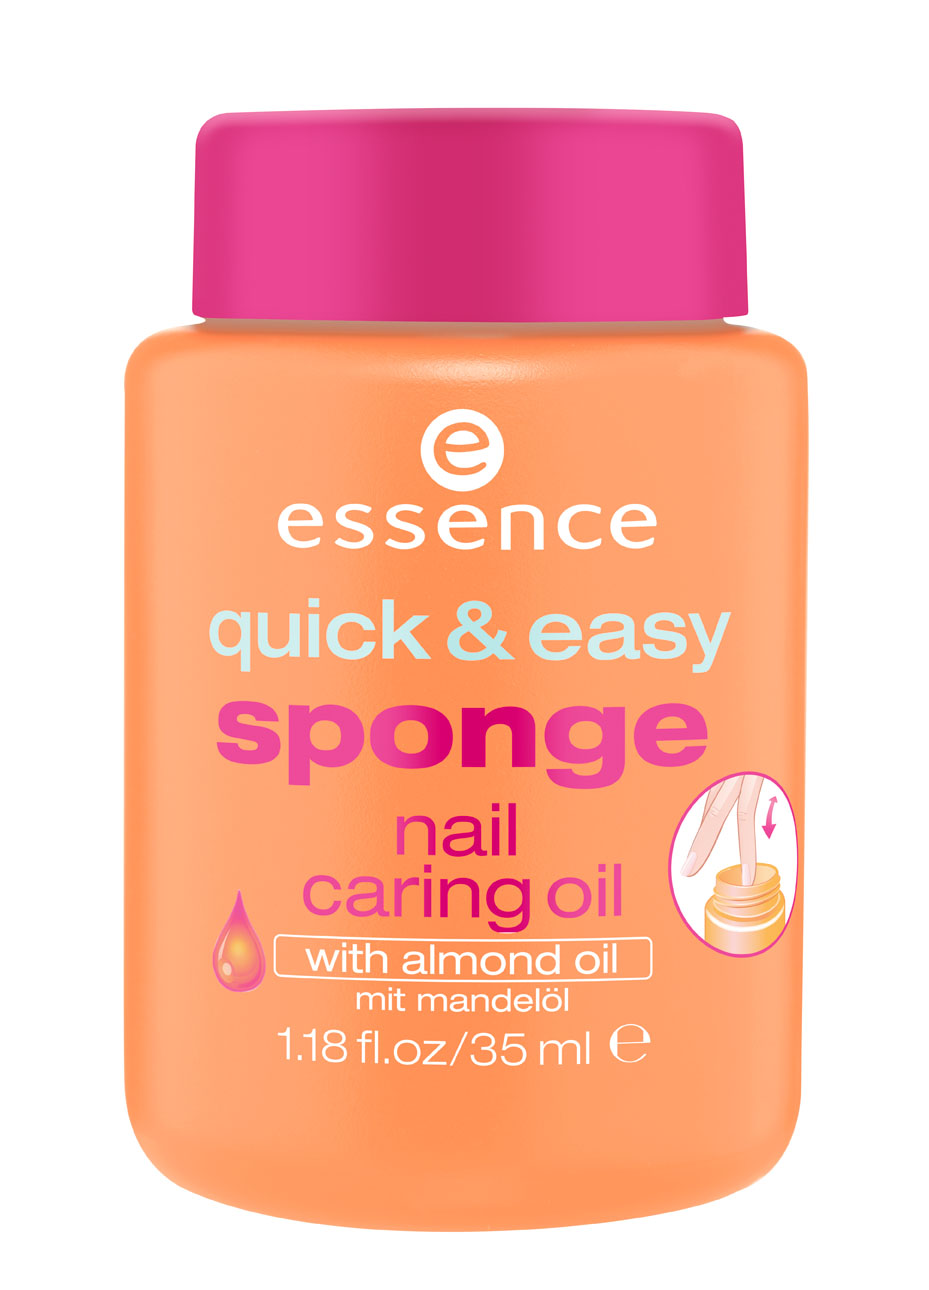 Essence quick & easy sponge nail caring oil